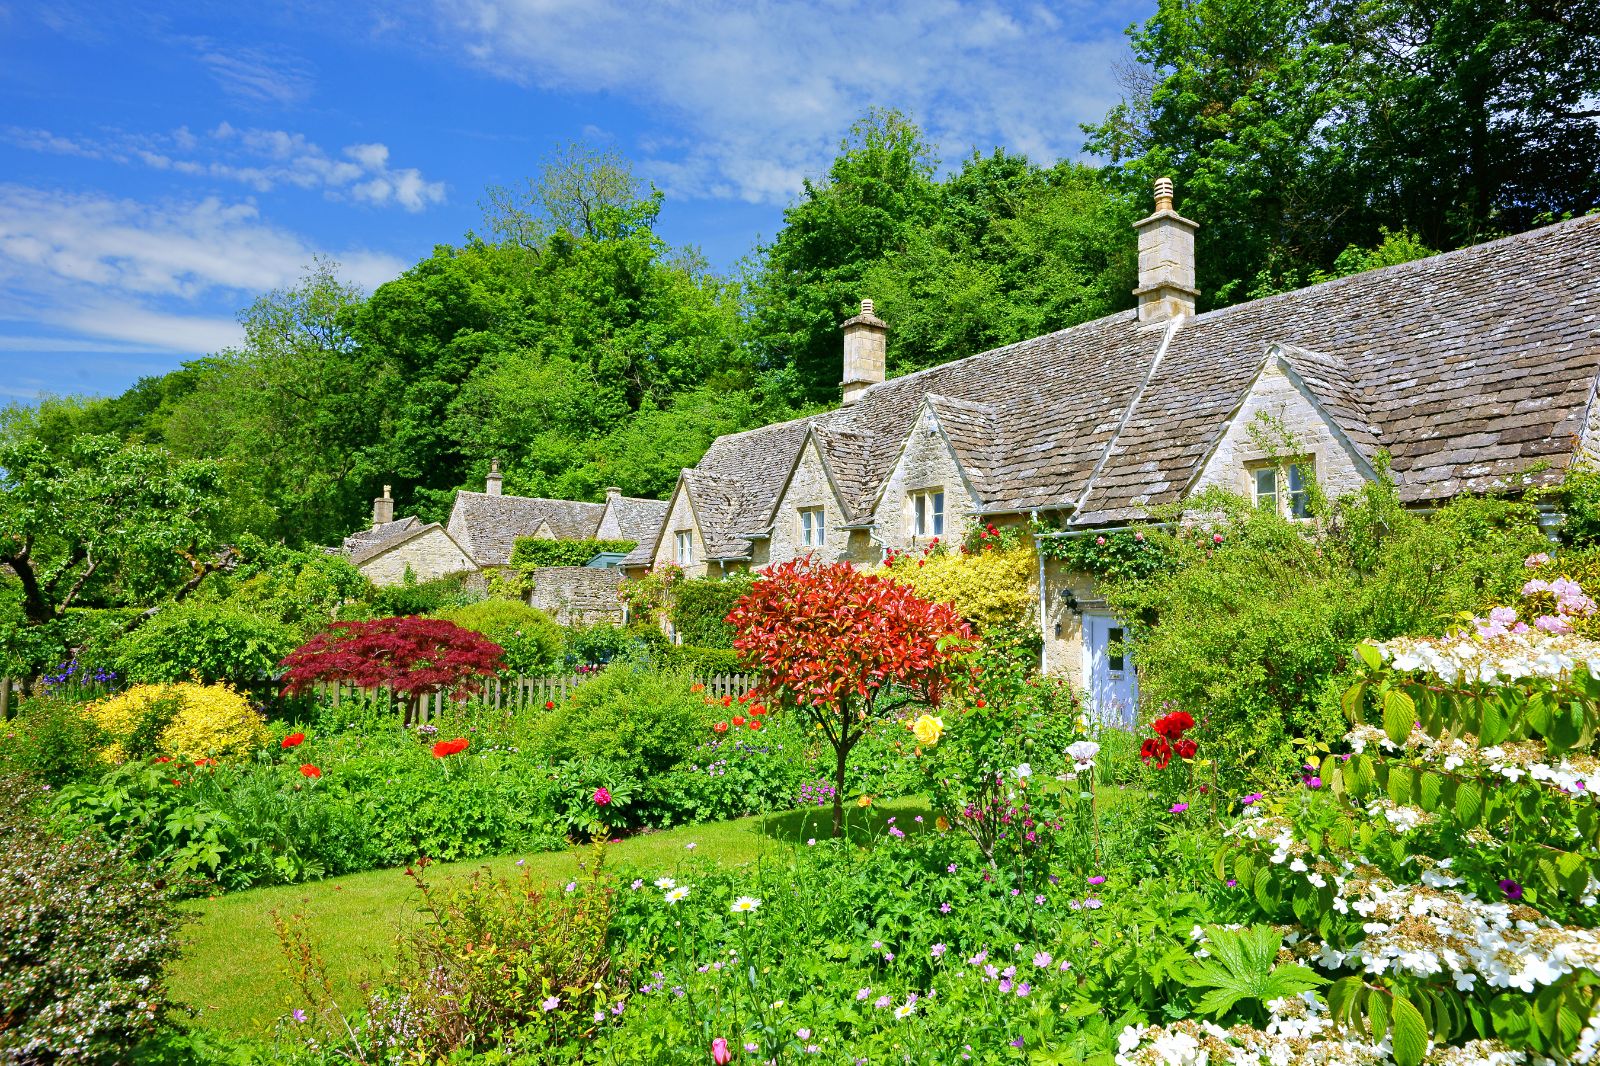 Cottages with colourful gardens in the Cotswolds in England